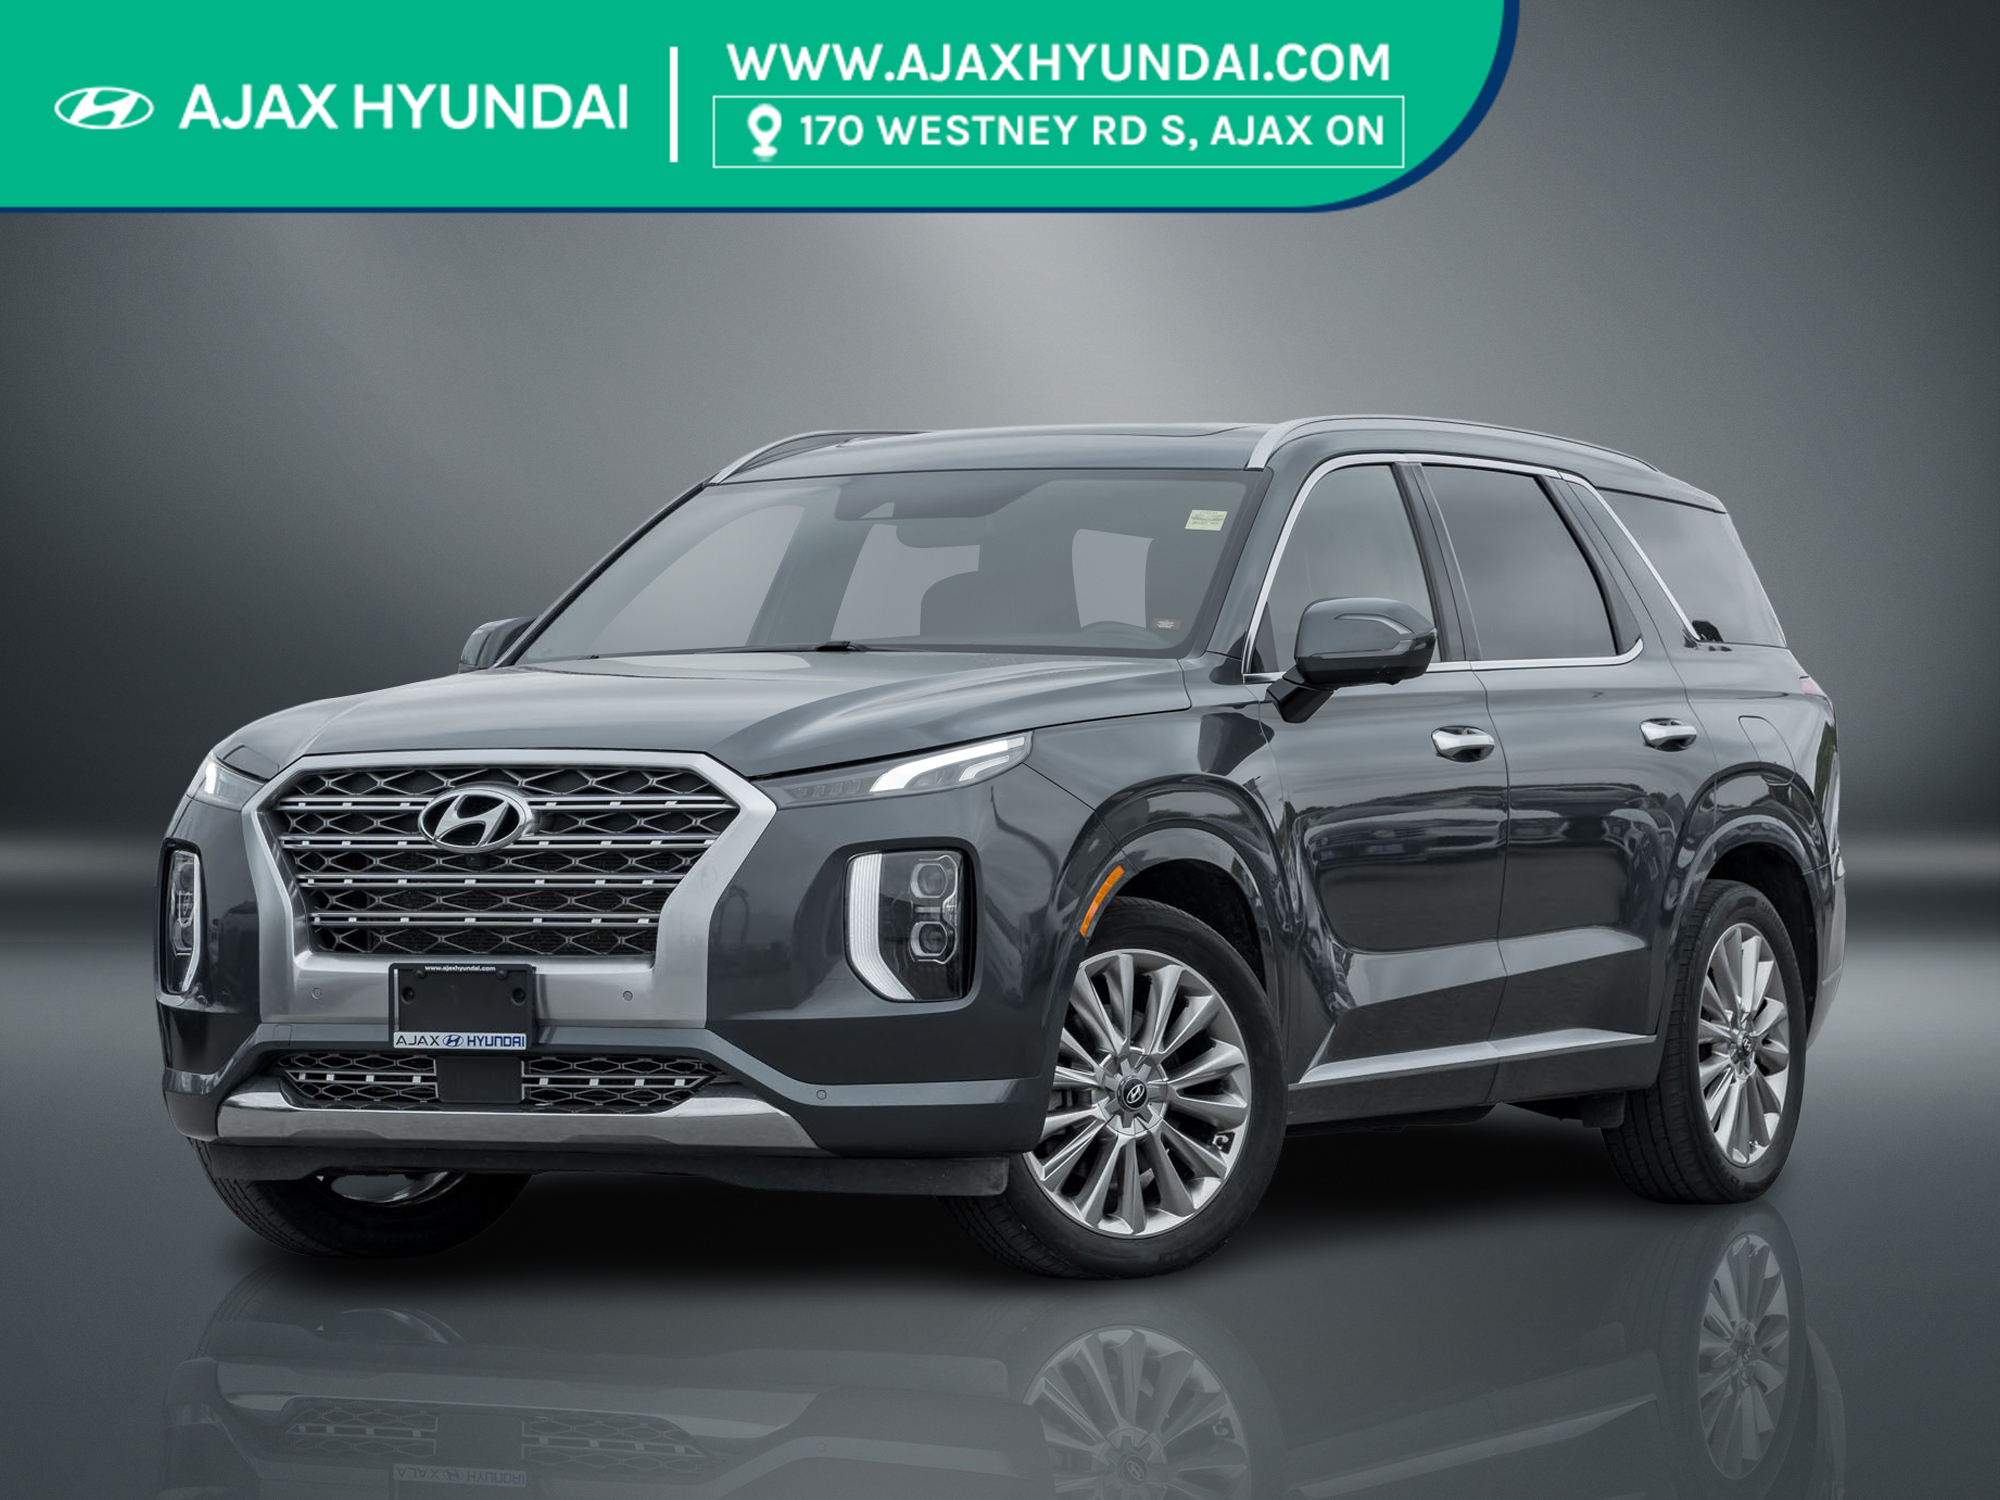 2020 Hyundai Palisade ULTIMATE | RATES FROM 4.99% ULTIMATE | RATES FROM 